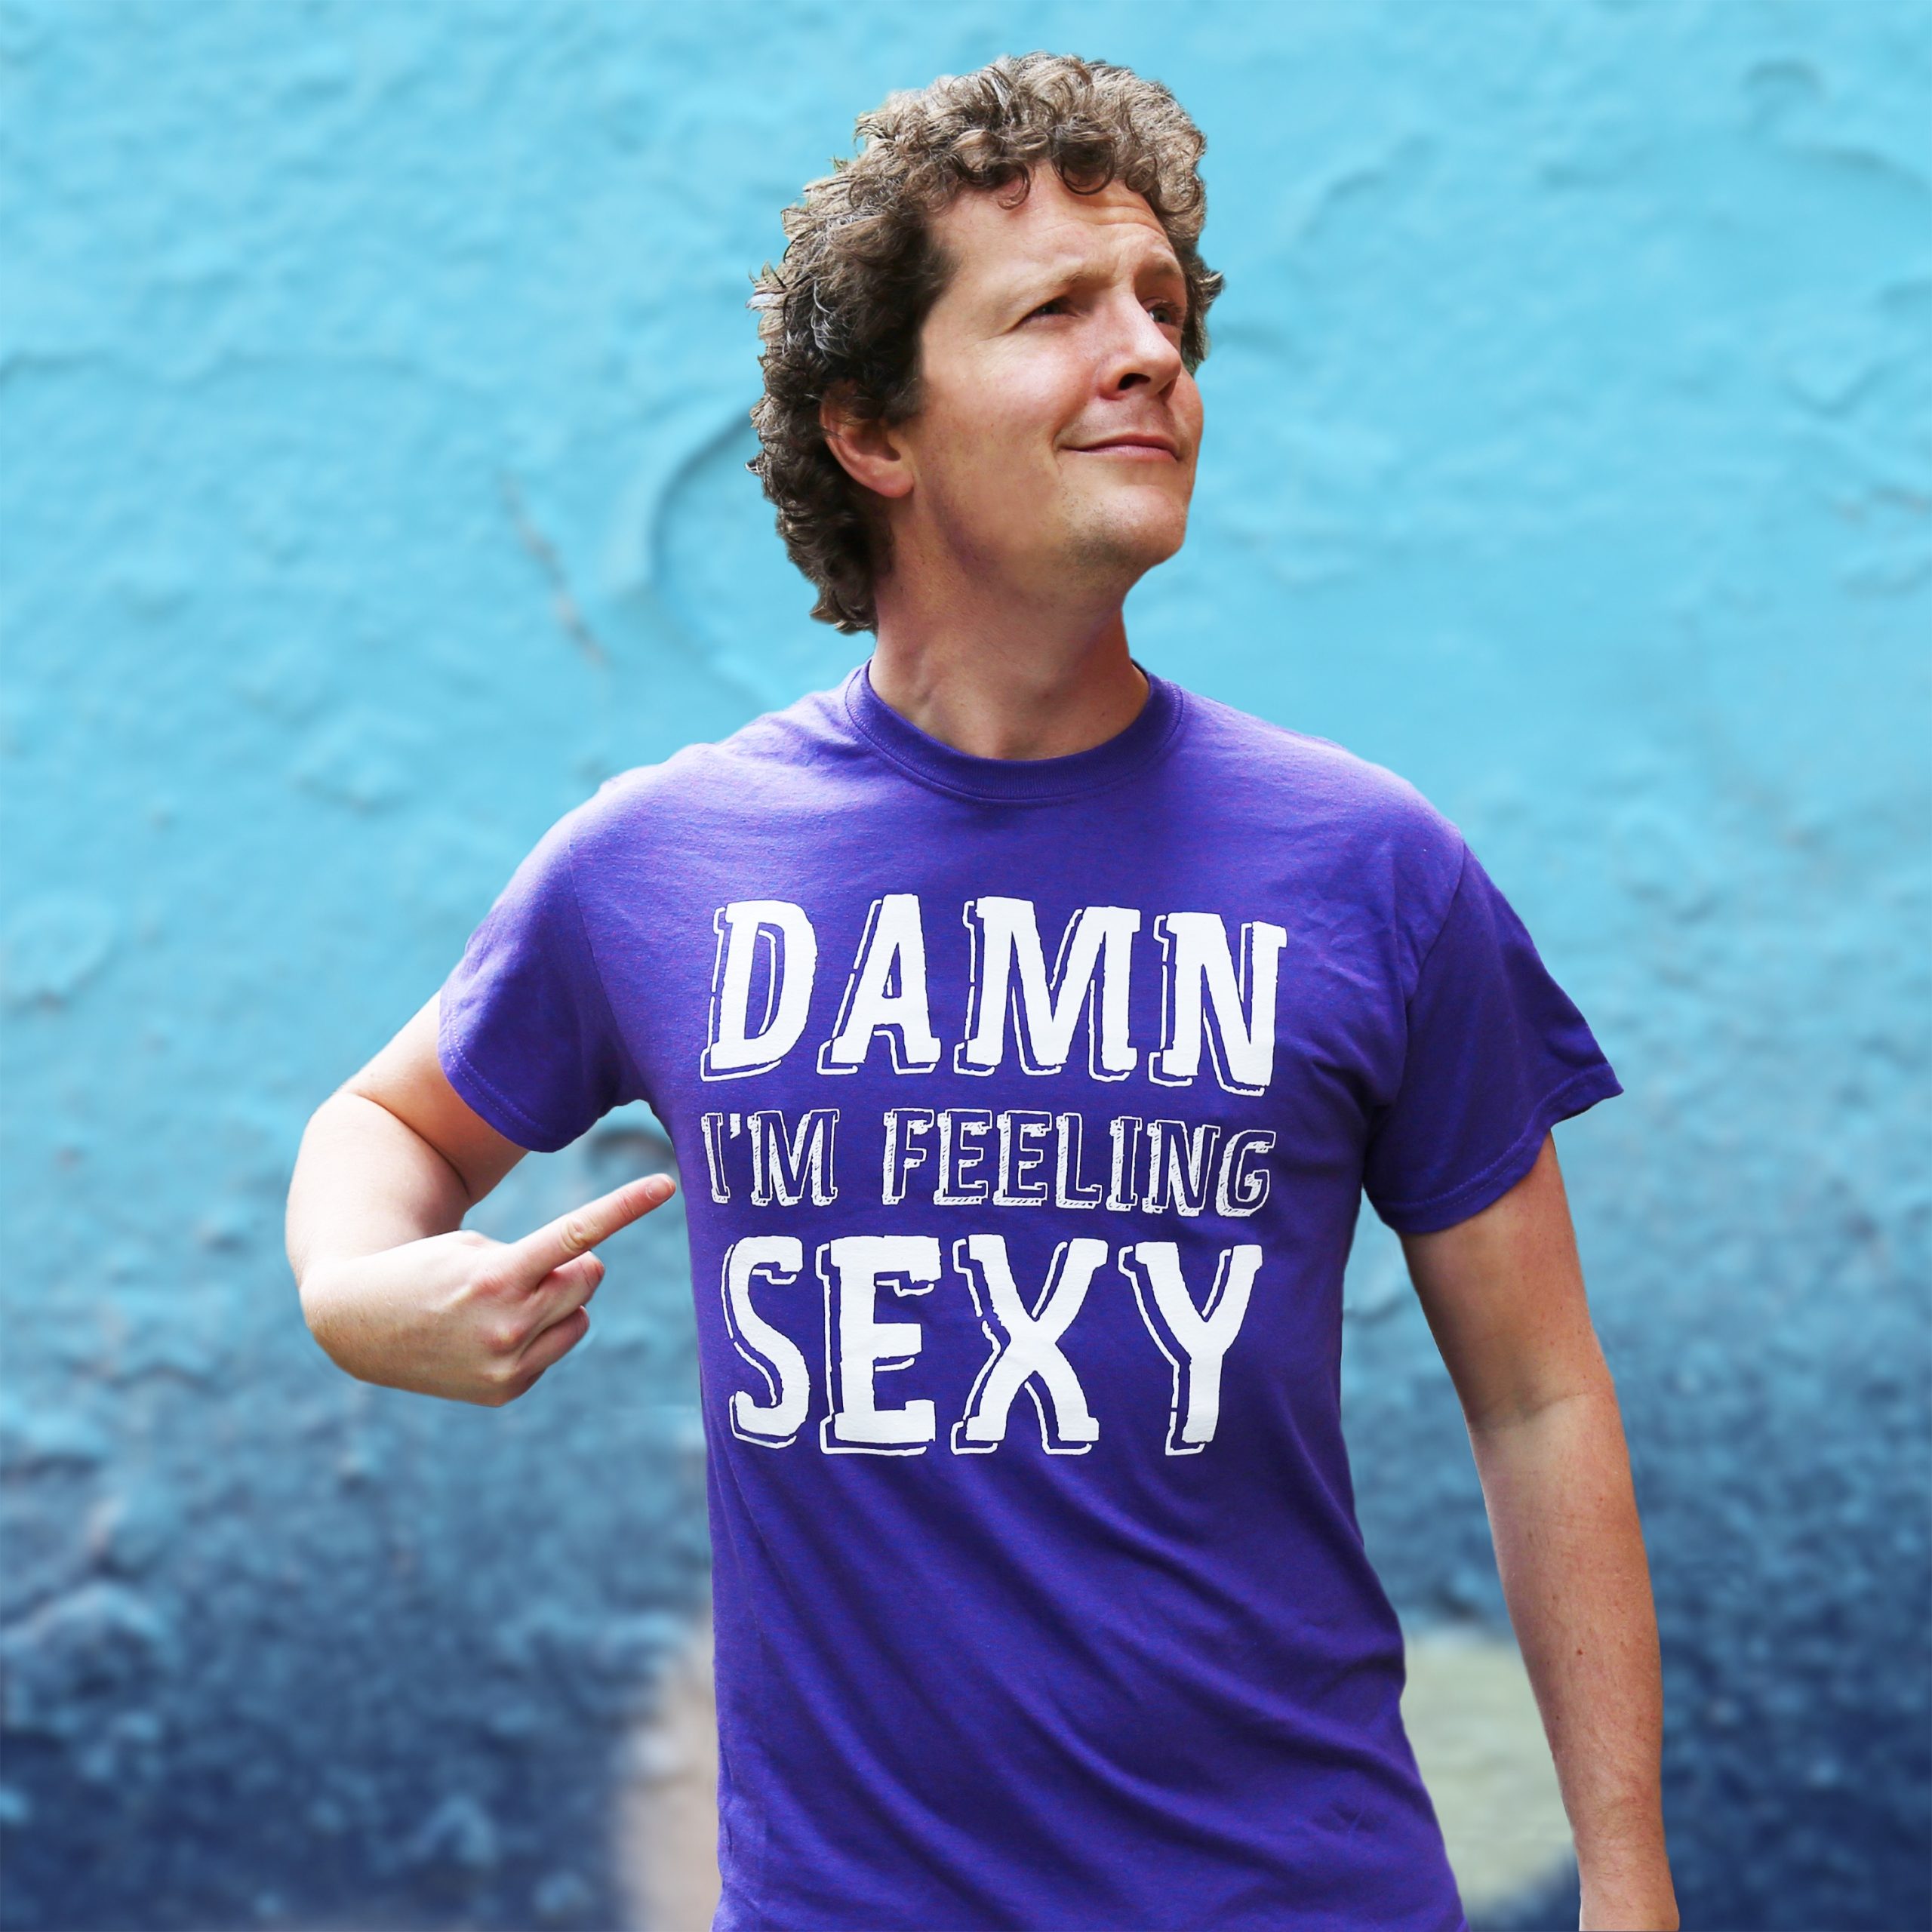 The Noise Next Doors “damn Im Feeling Sexy” T Shirt Purple And White The Noise Next Door